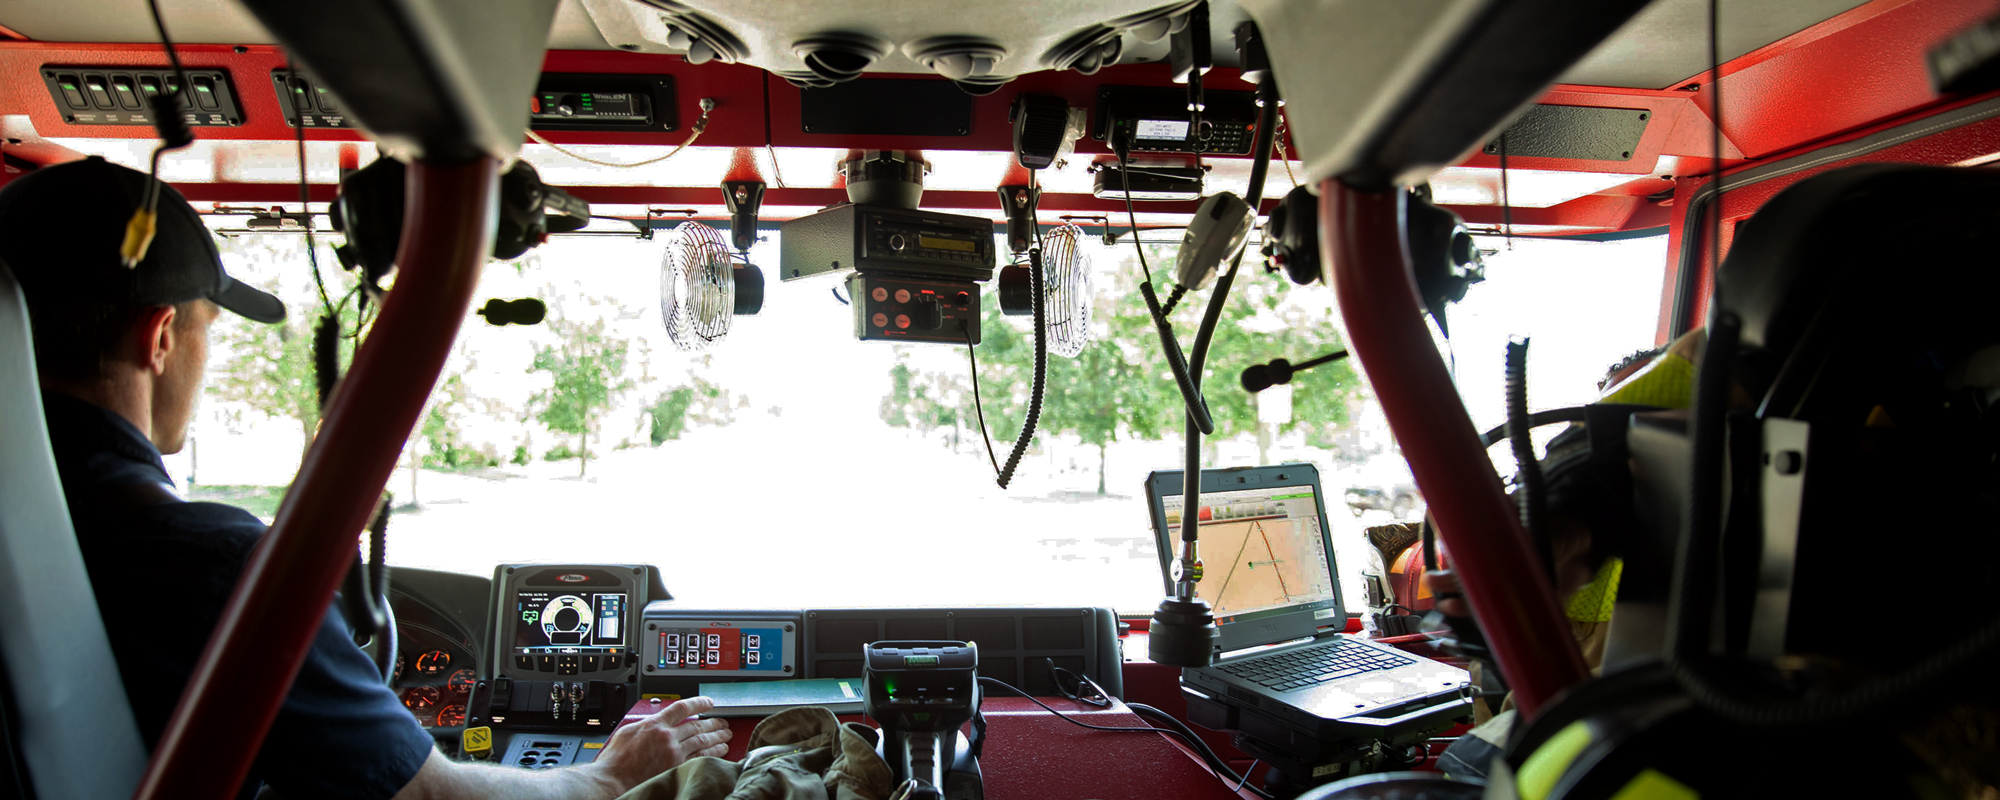 Electric Fire Truck Interior Driving 